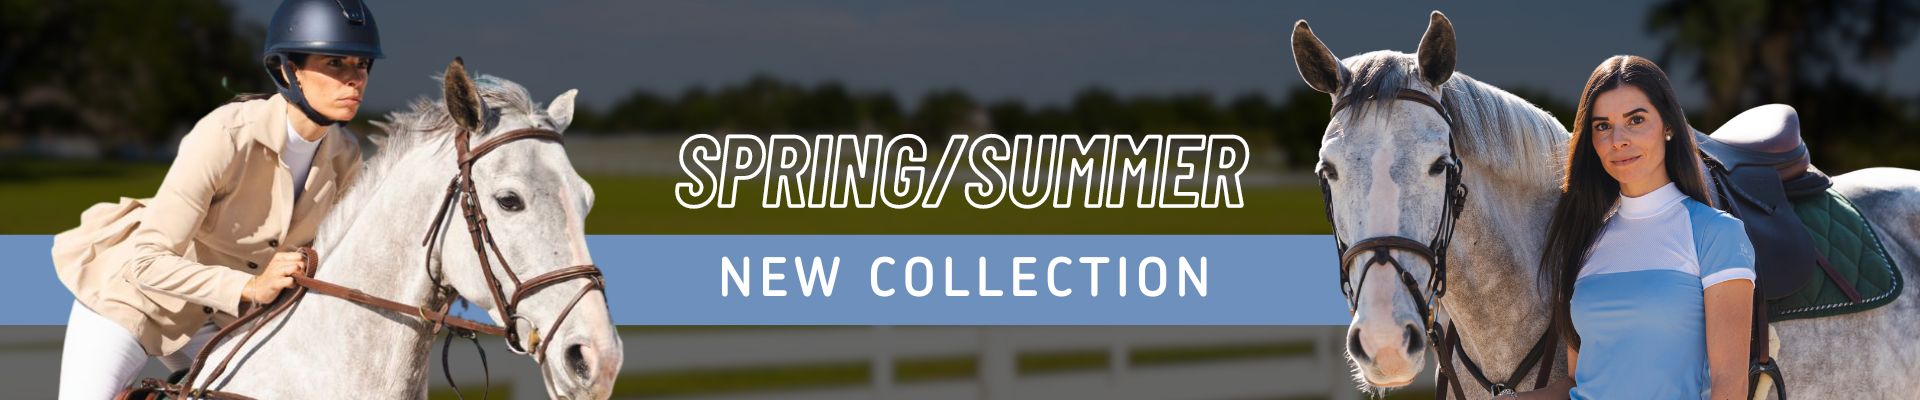 SS24 new collection banner